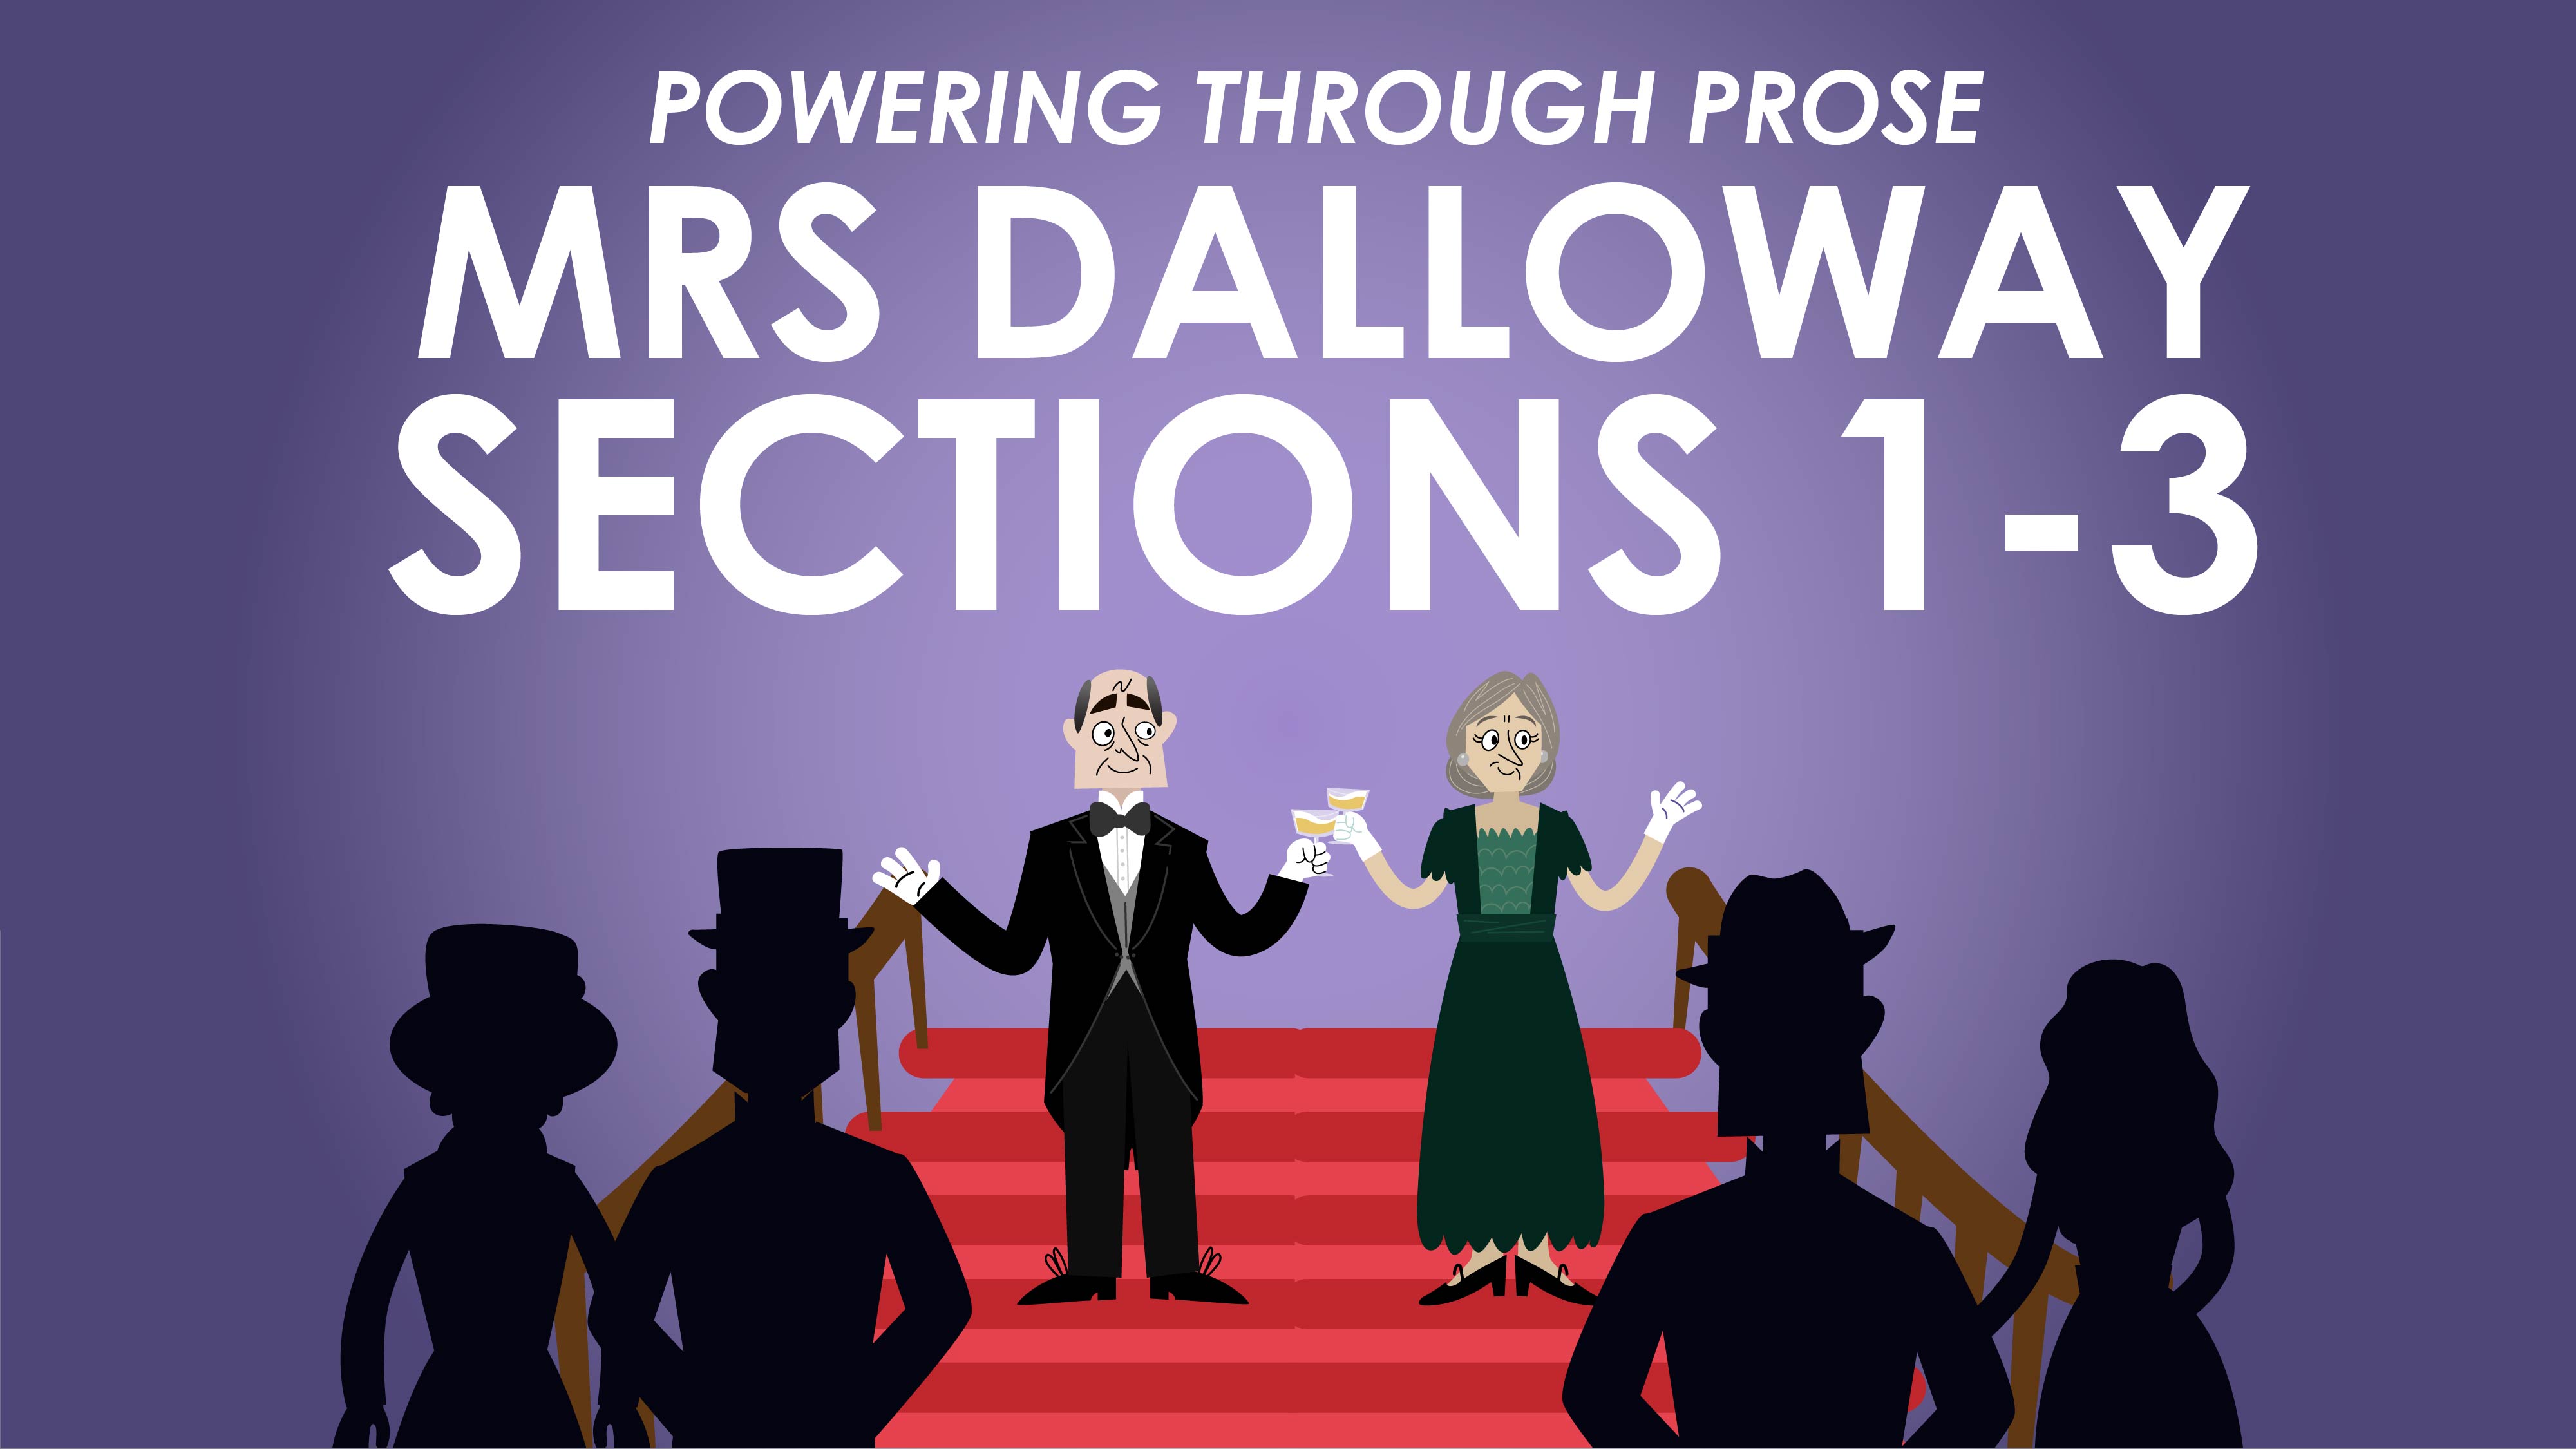 Mrs Dalloway - Virginia Woolf - Sections 1-3 - Powering Through Prose Series